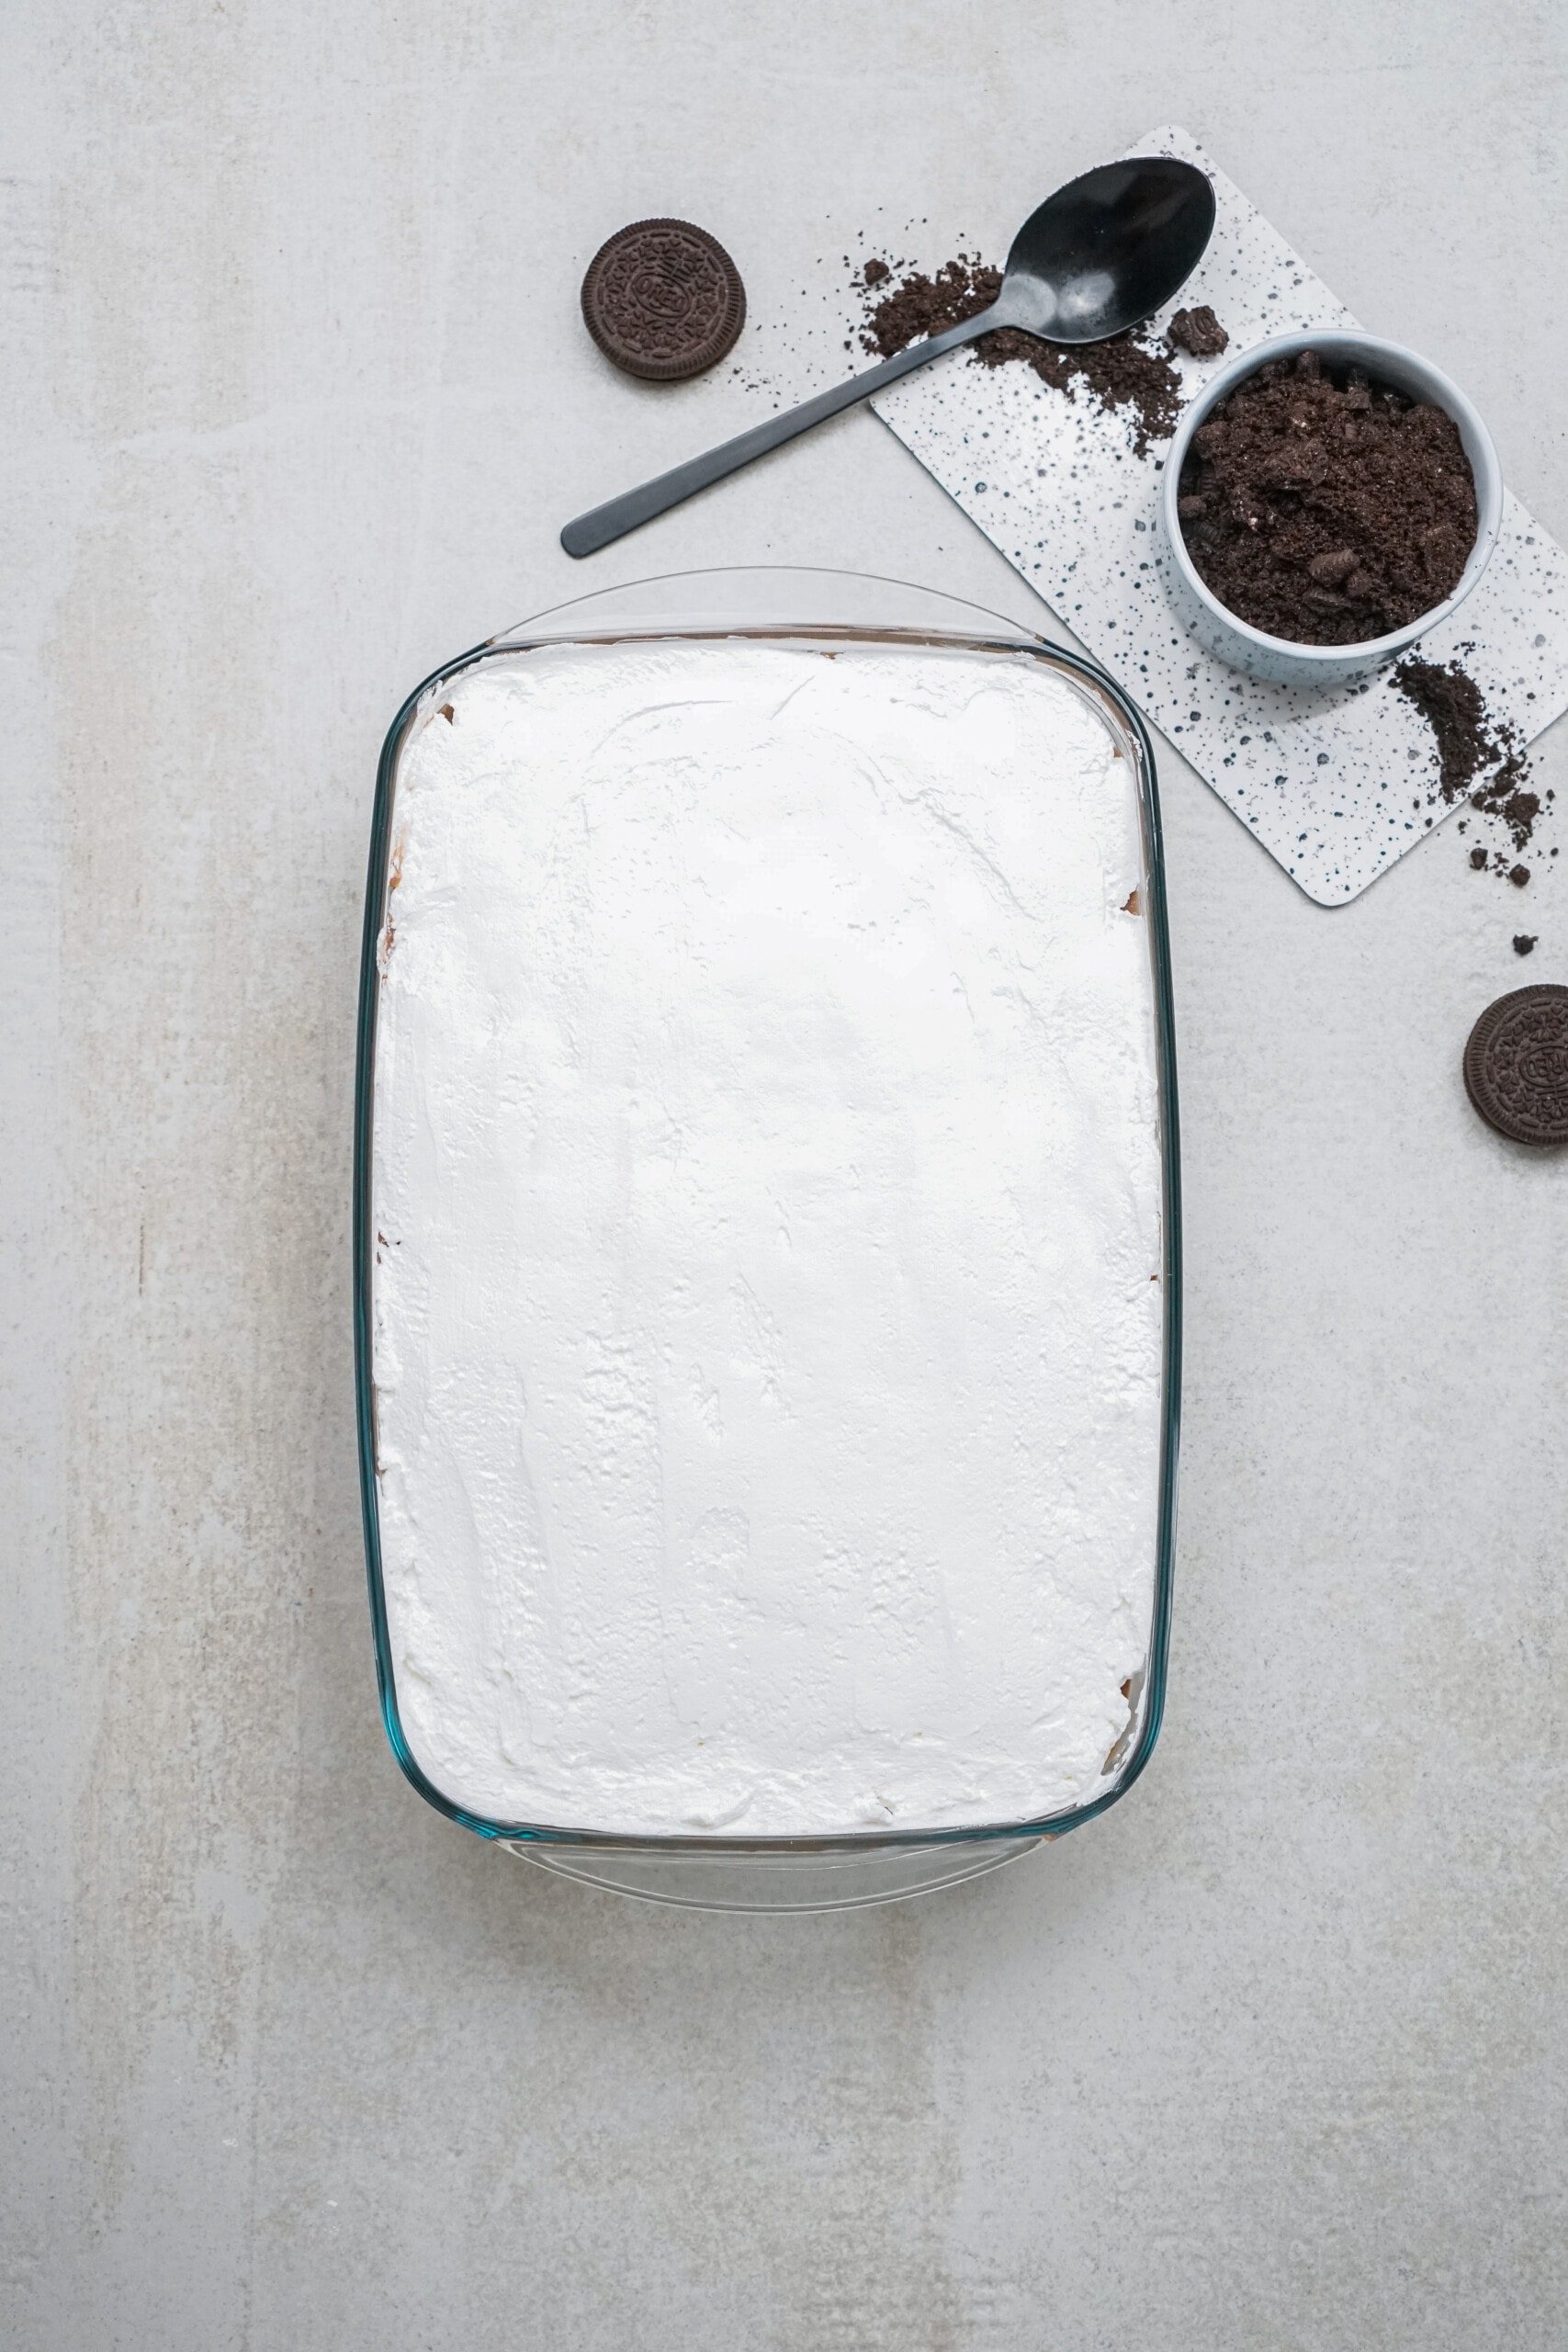 chocolate lasagna with top whipped cream layer on top